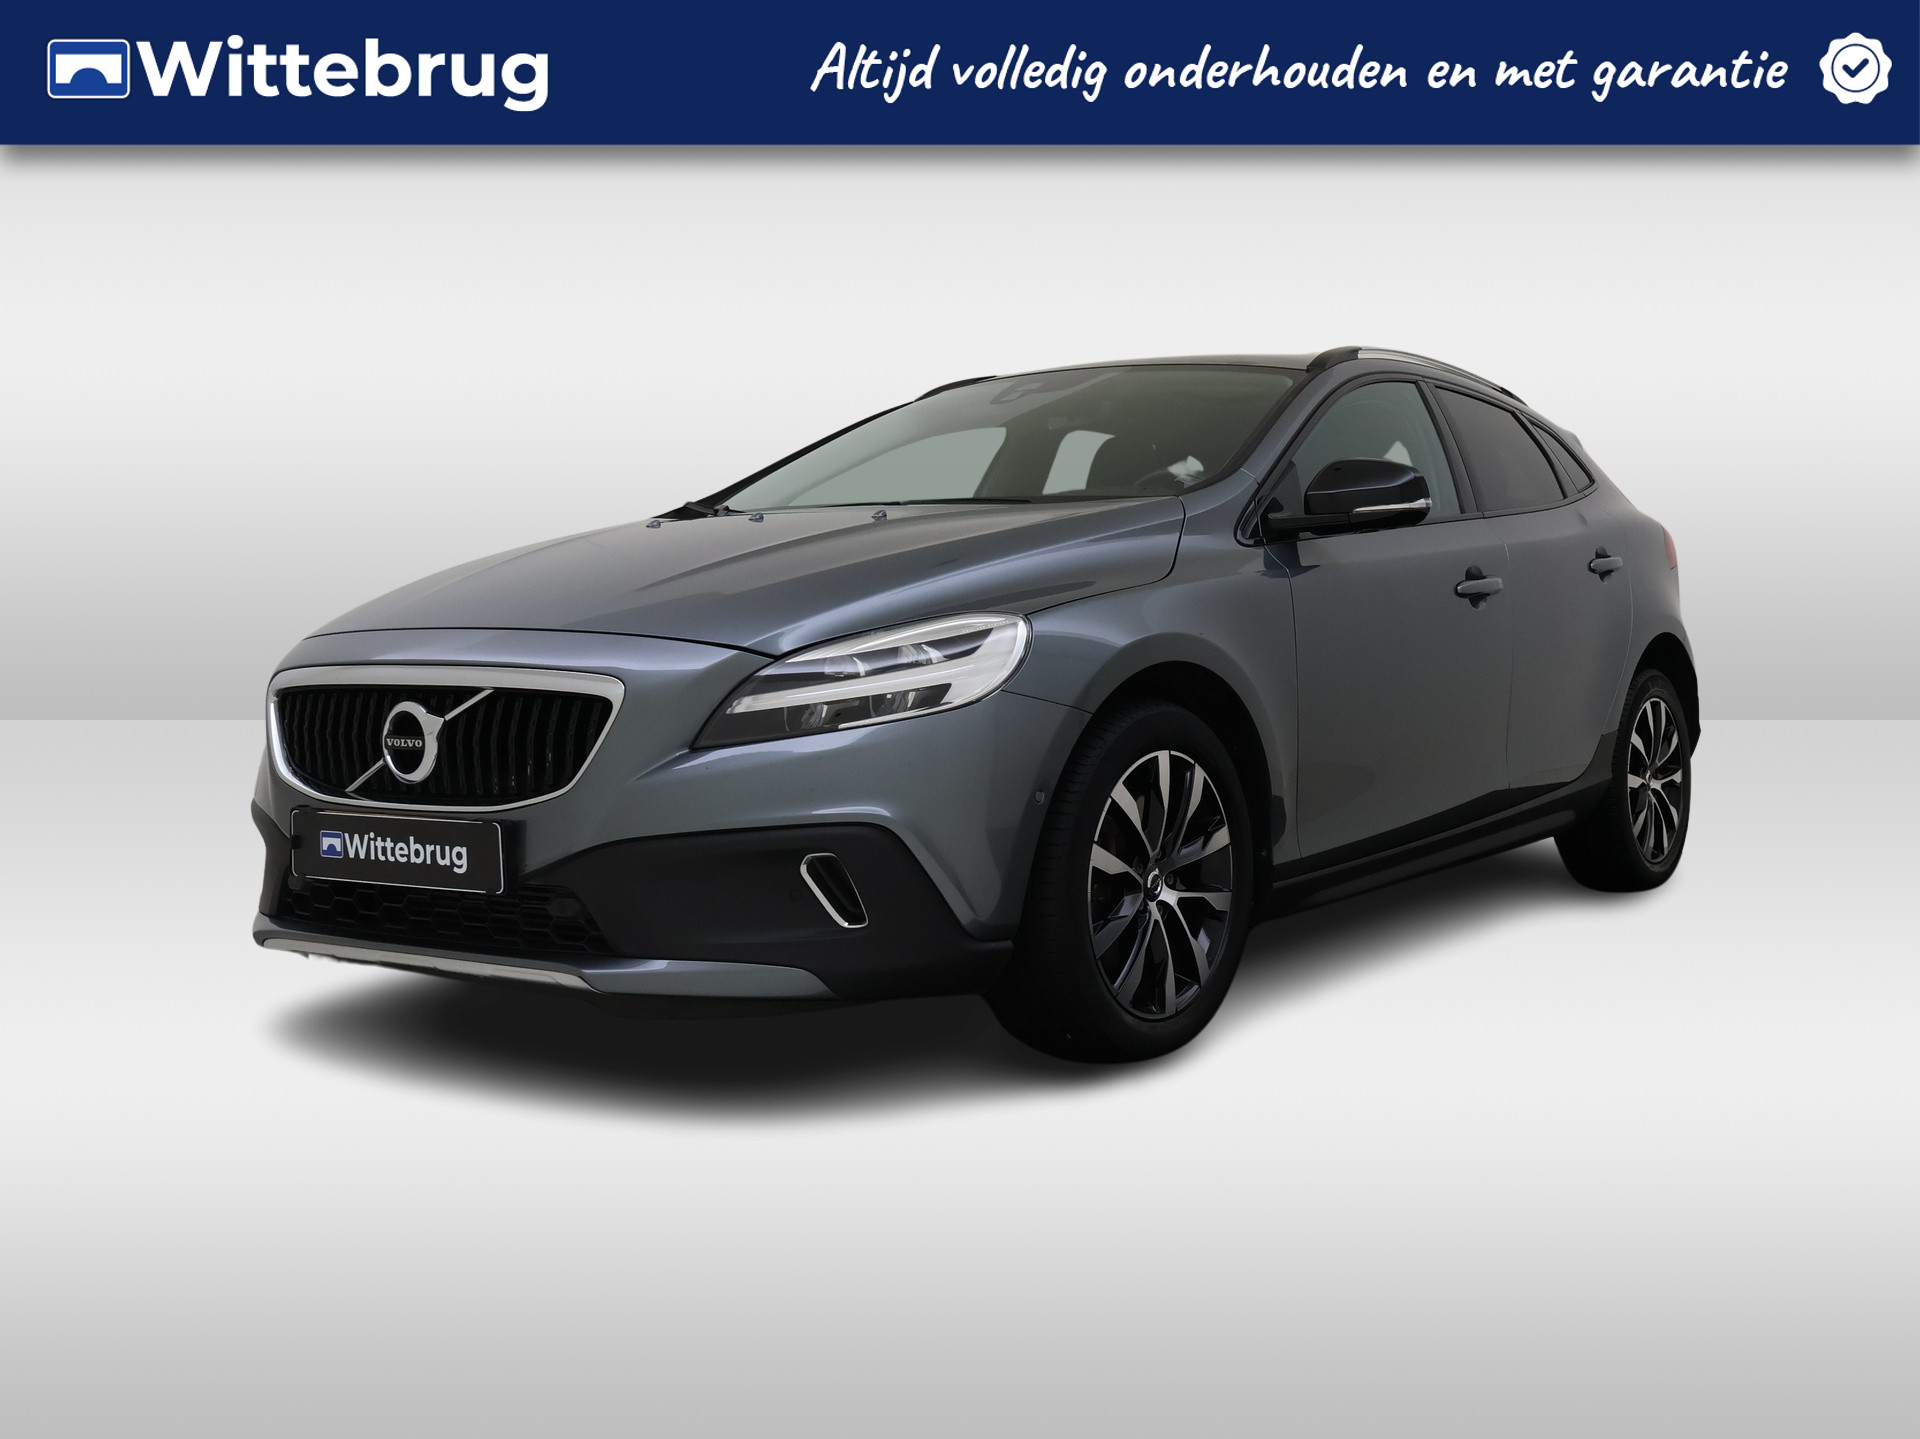 Volvo V40 Cross Country 1.5 T3 Dynamic Edition Automaat | Panorama dak | Navigatie | Climate control bij viaBOVAG.nl